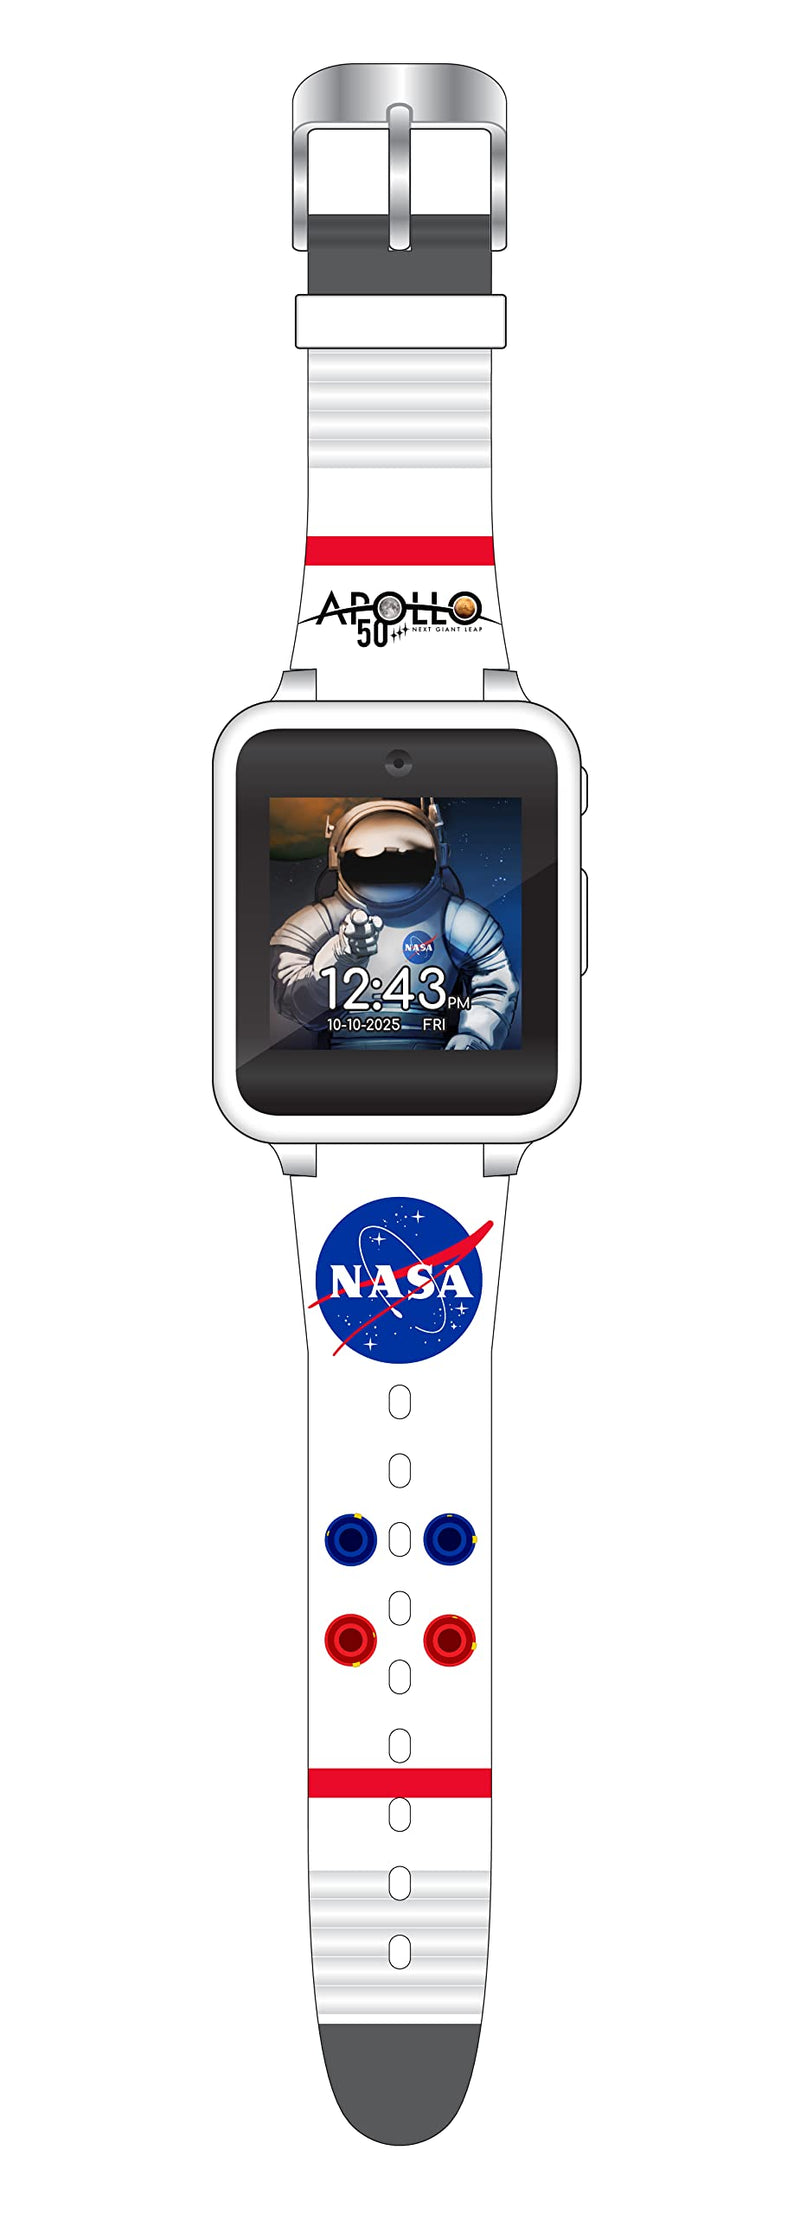  [AUSTRALIA] - Accutime Kids NASA Astronaut White Educational Learning Touchscreen Smart Watch Toy for Boys, Girls, Toddlers - Selfie Cam, Learning Games, Alarm, Calculator, Pedometer and More (Model: NAS4011AZ)